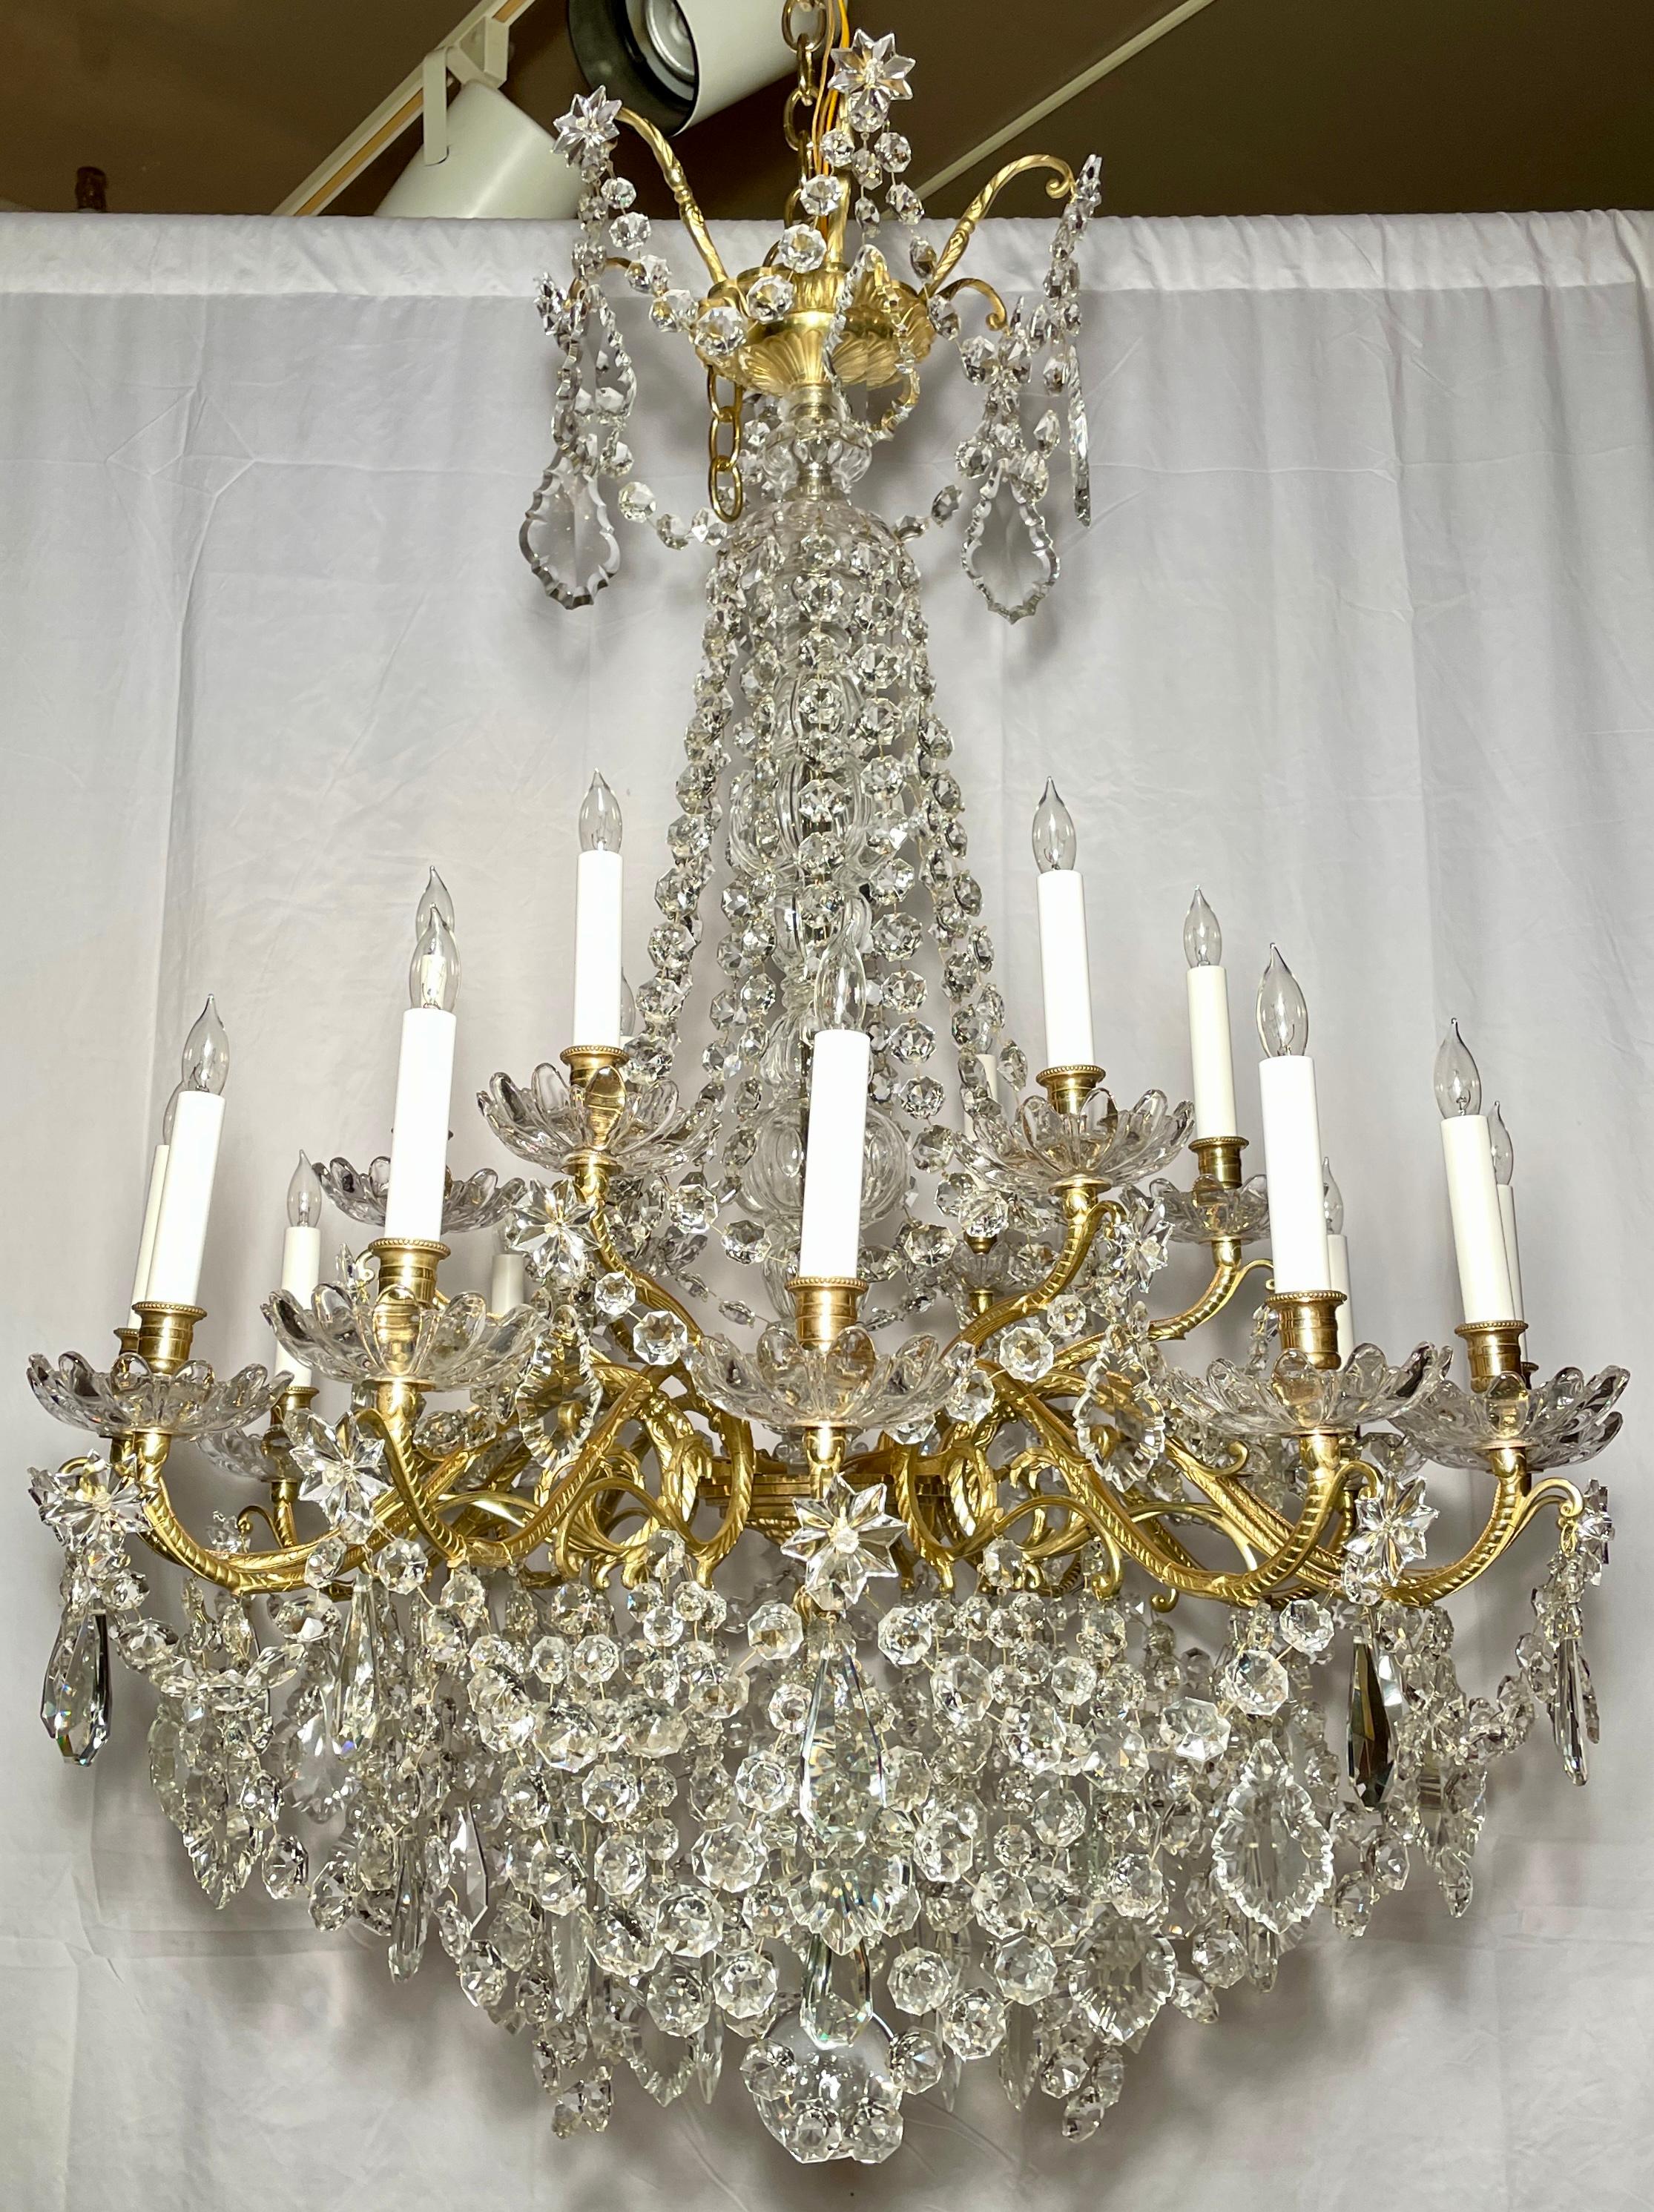 Antique French gold bronze and cut crystal 18-light chandelier, circa 1890s.